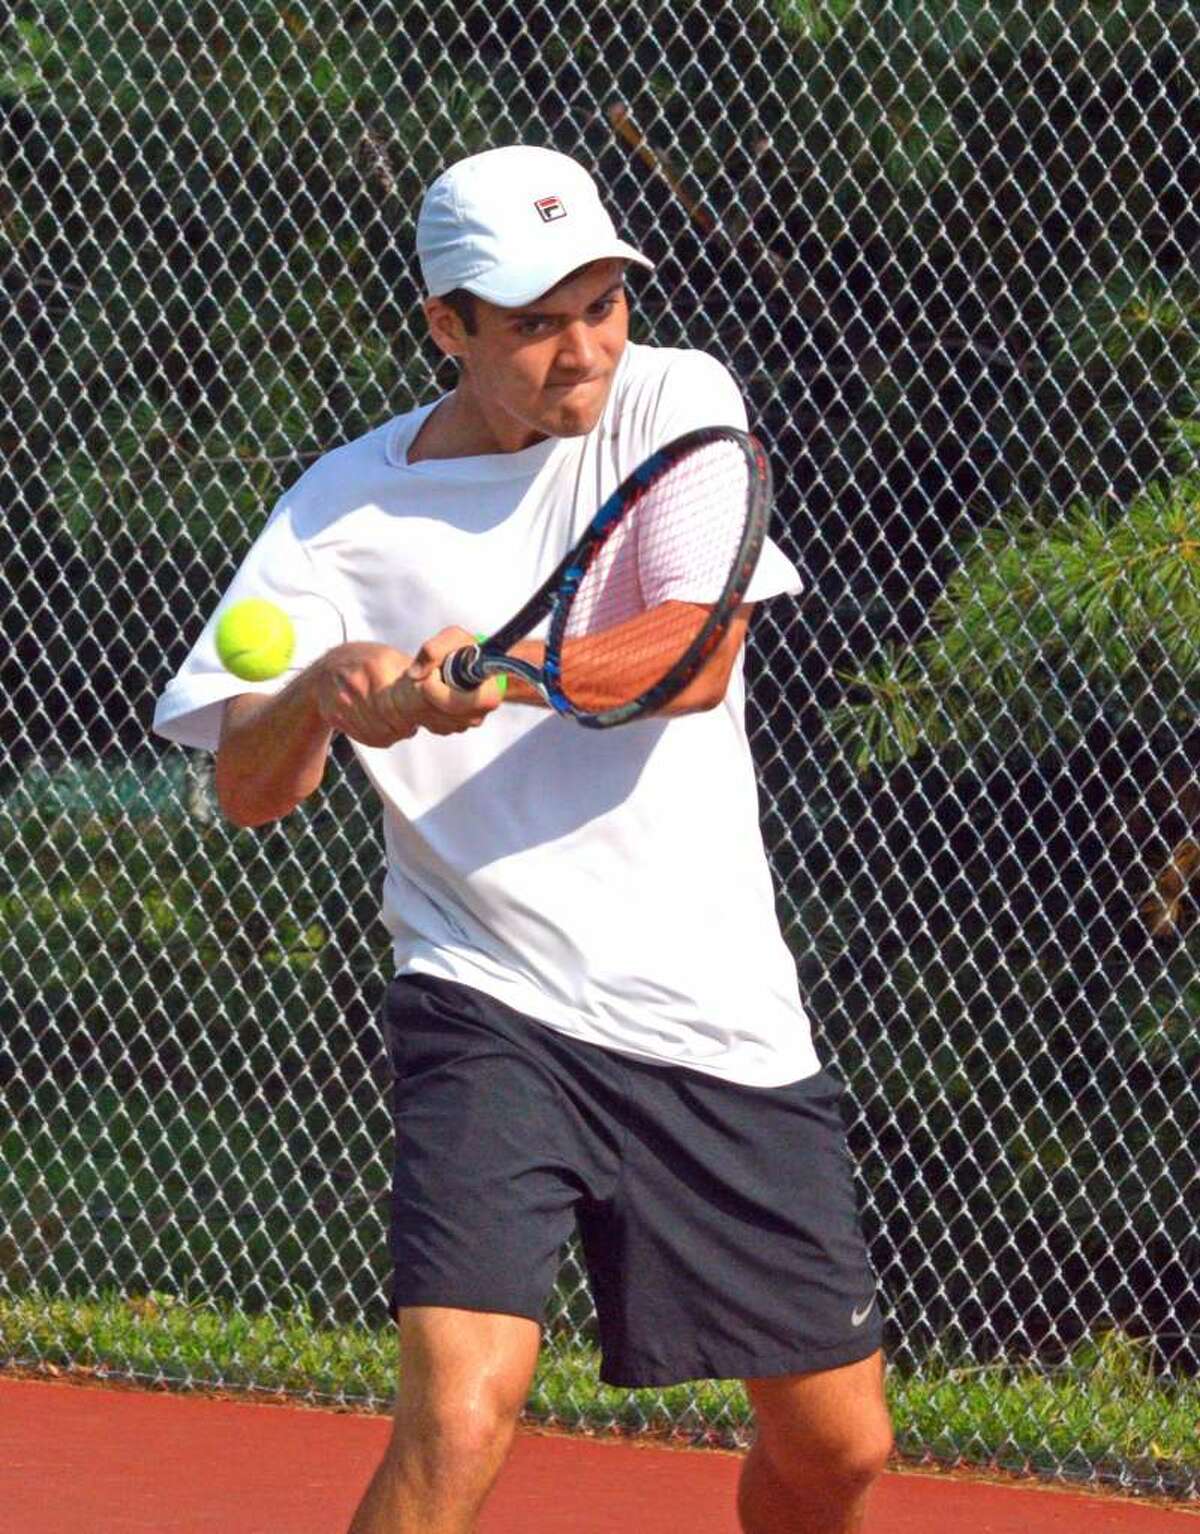 Seth Lipe, who will be a senior at EHS, hits a two-handed backhand during last year’s Pro Wild Card Challenge.